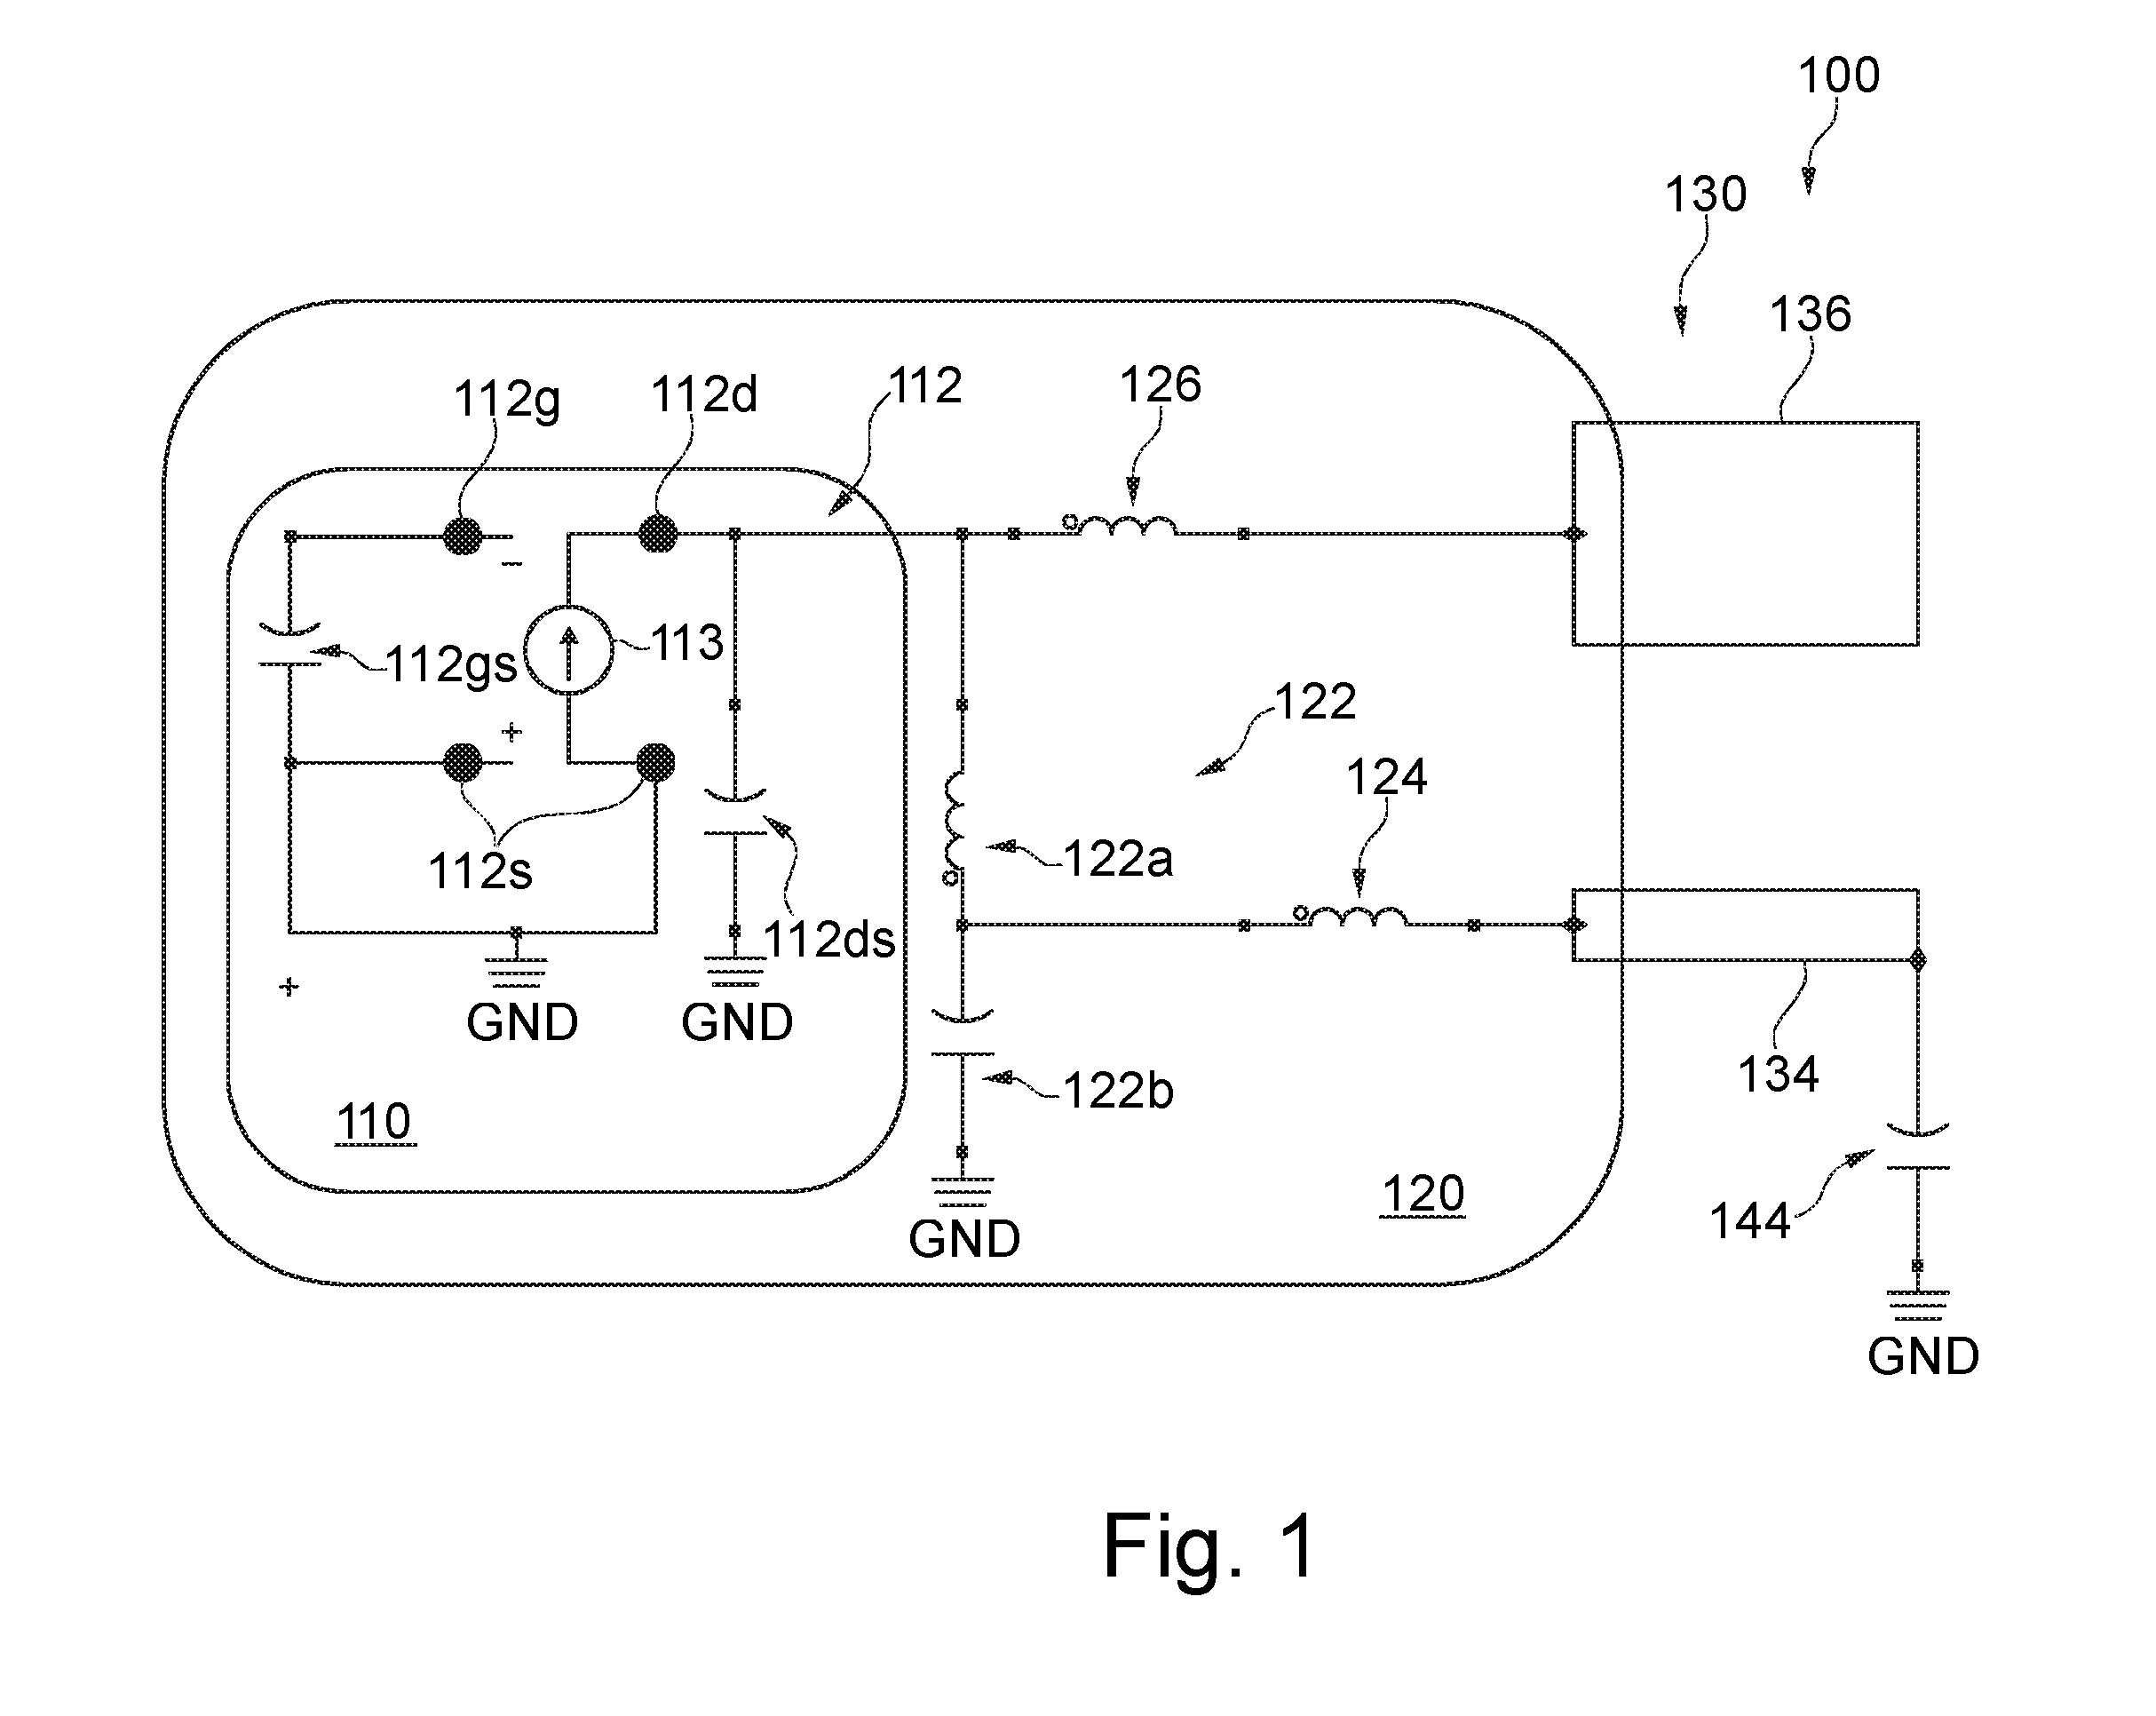 Packaged RF power transistor device having next to each other a ground and a video lead for connecting a decoupling capacitor, RF power amplifier